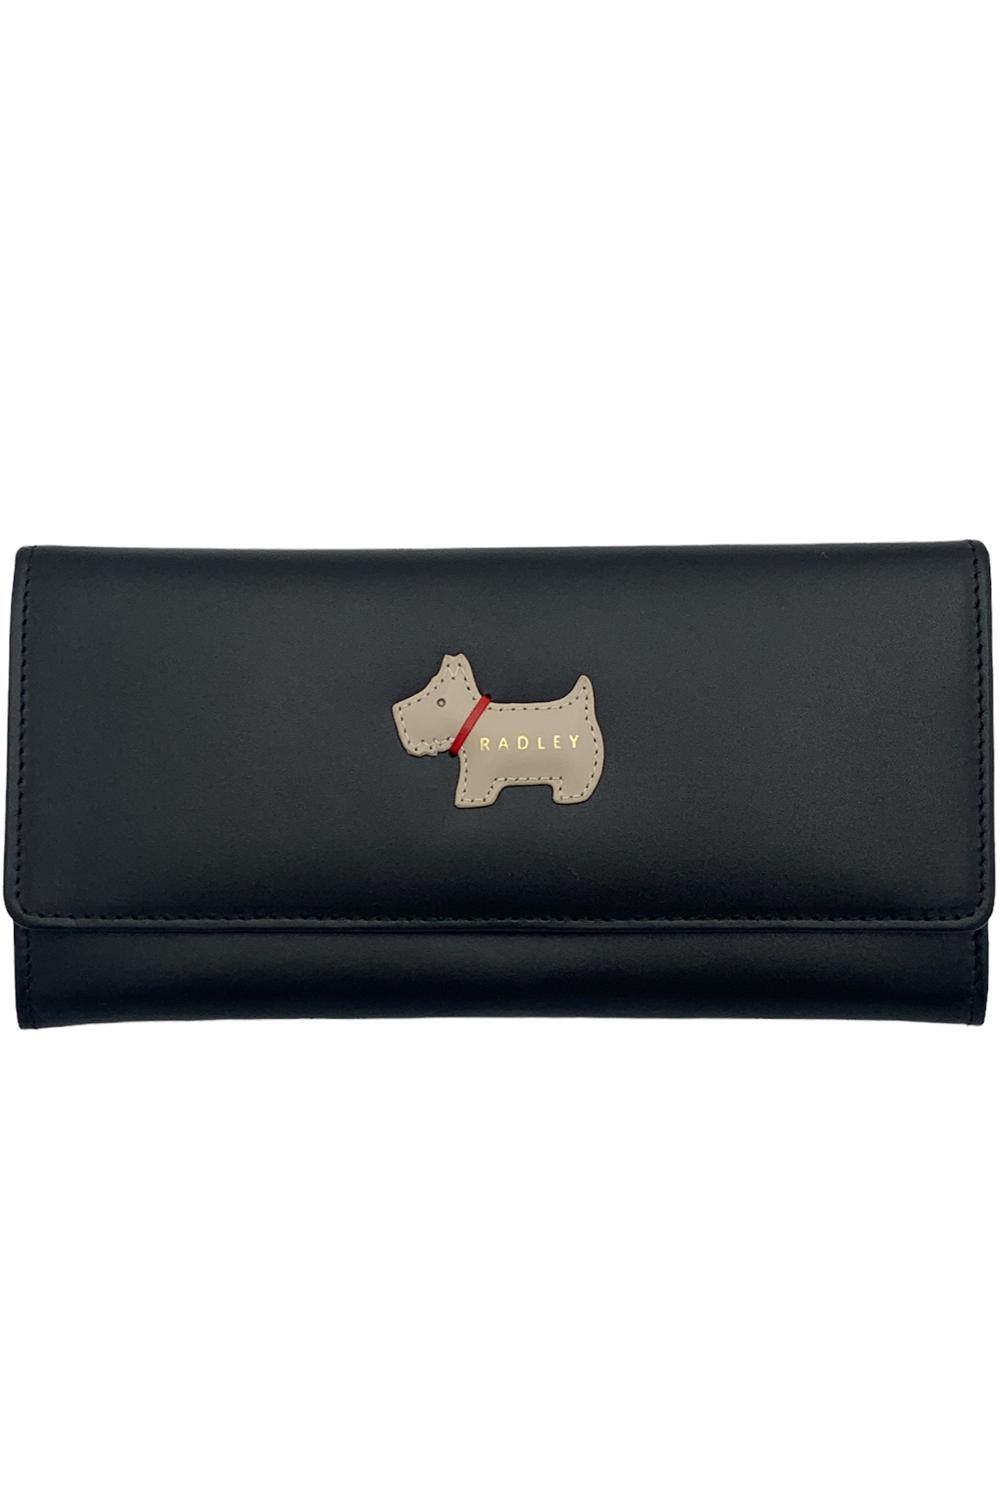 Radley London Heritage Large Flapover Leather Wallet